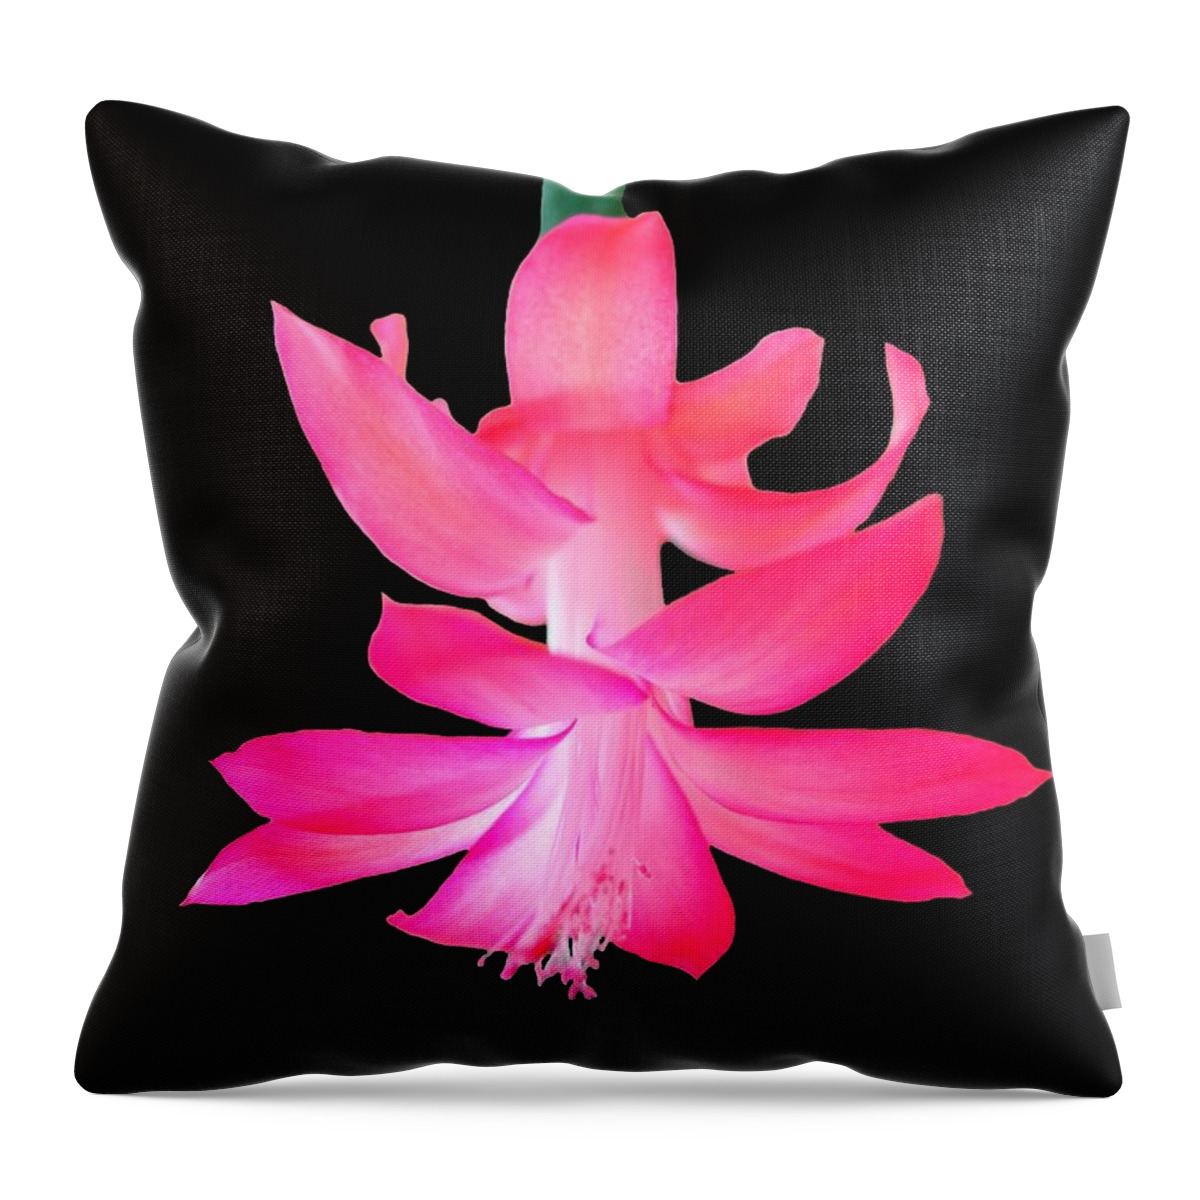 Flower Throw Pillow featuring the photograph Christmas Cactus by Steven Clipperton